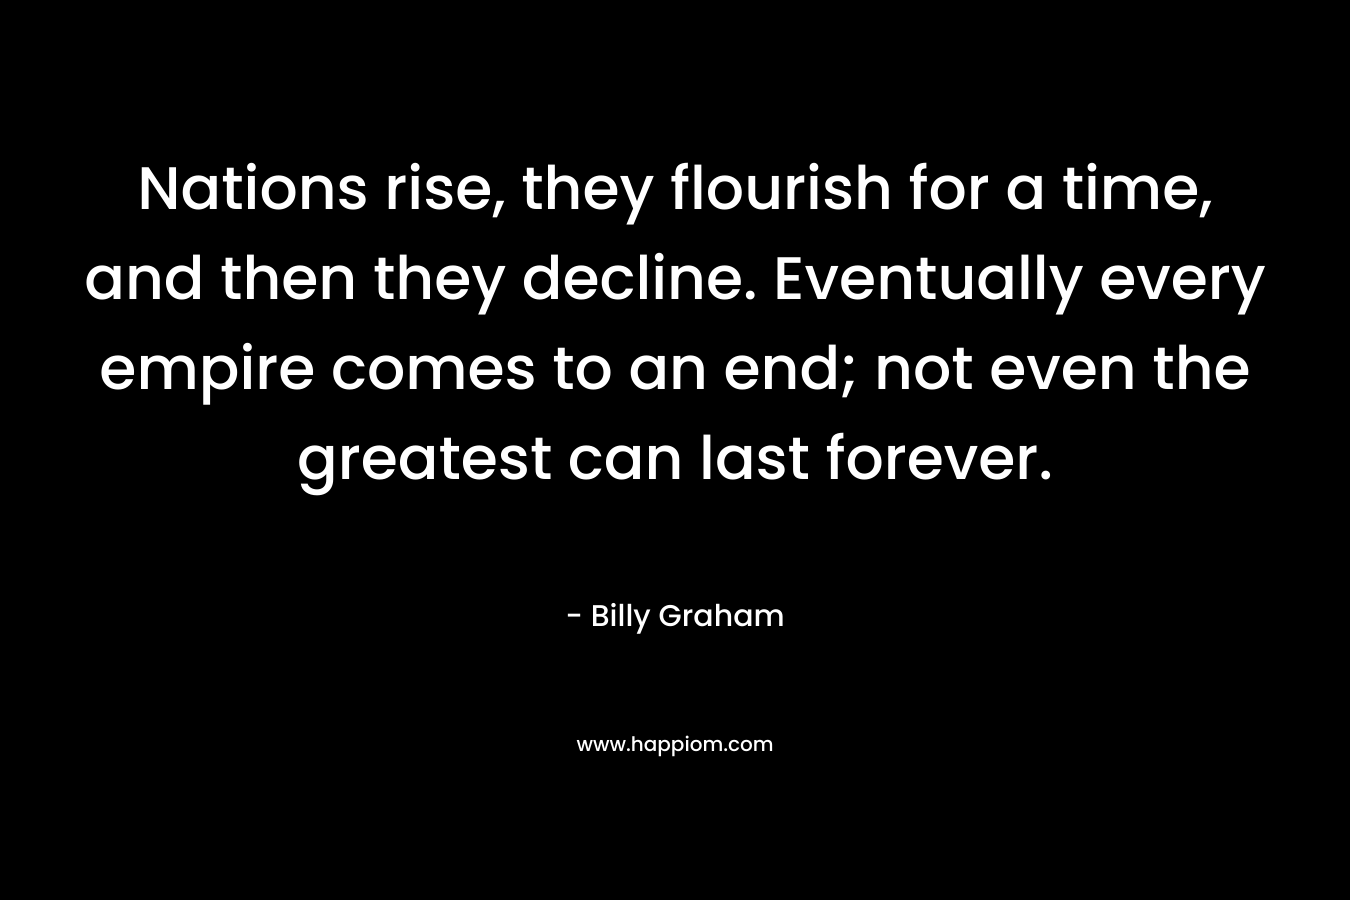 Nations rise, they flourish for a time, and then they decline. Eventually every empire comes to an end; not even the greatest can last forever. – Billy Graham